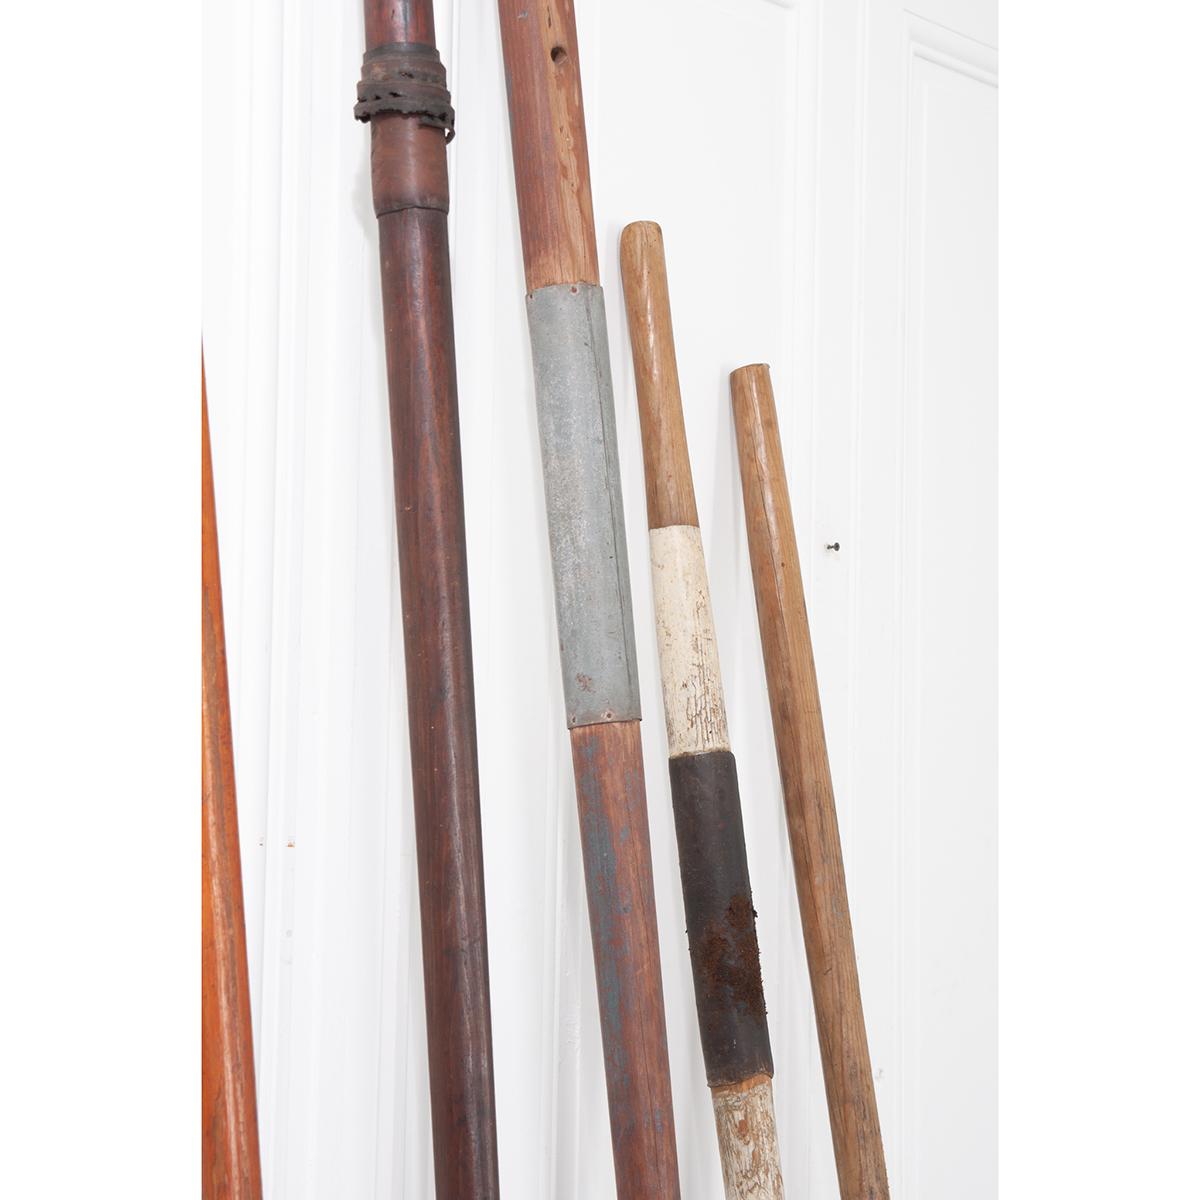 Wood Collection of 10 Vintage Oars